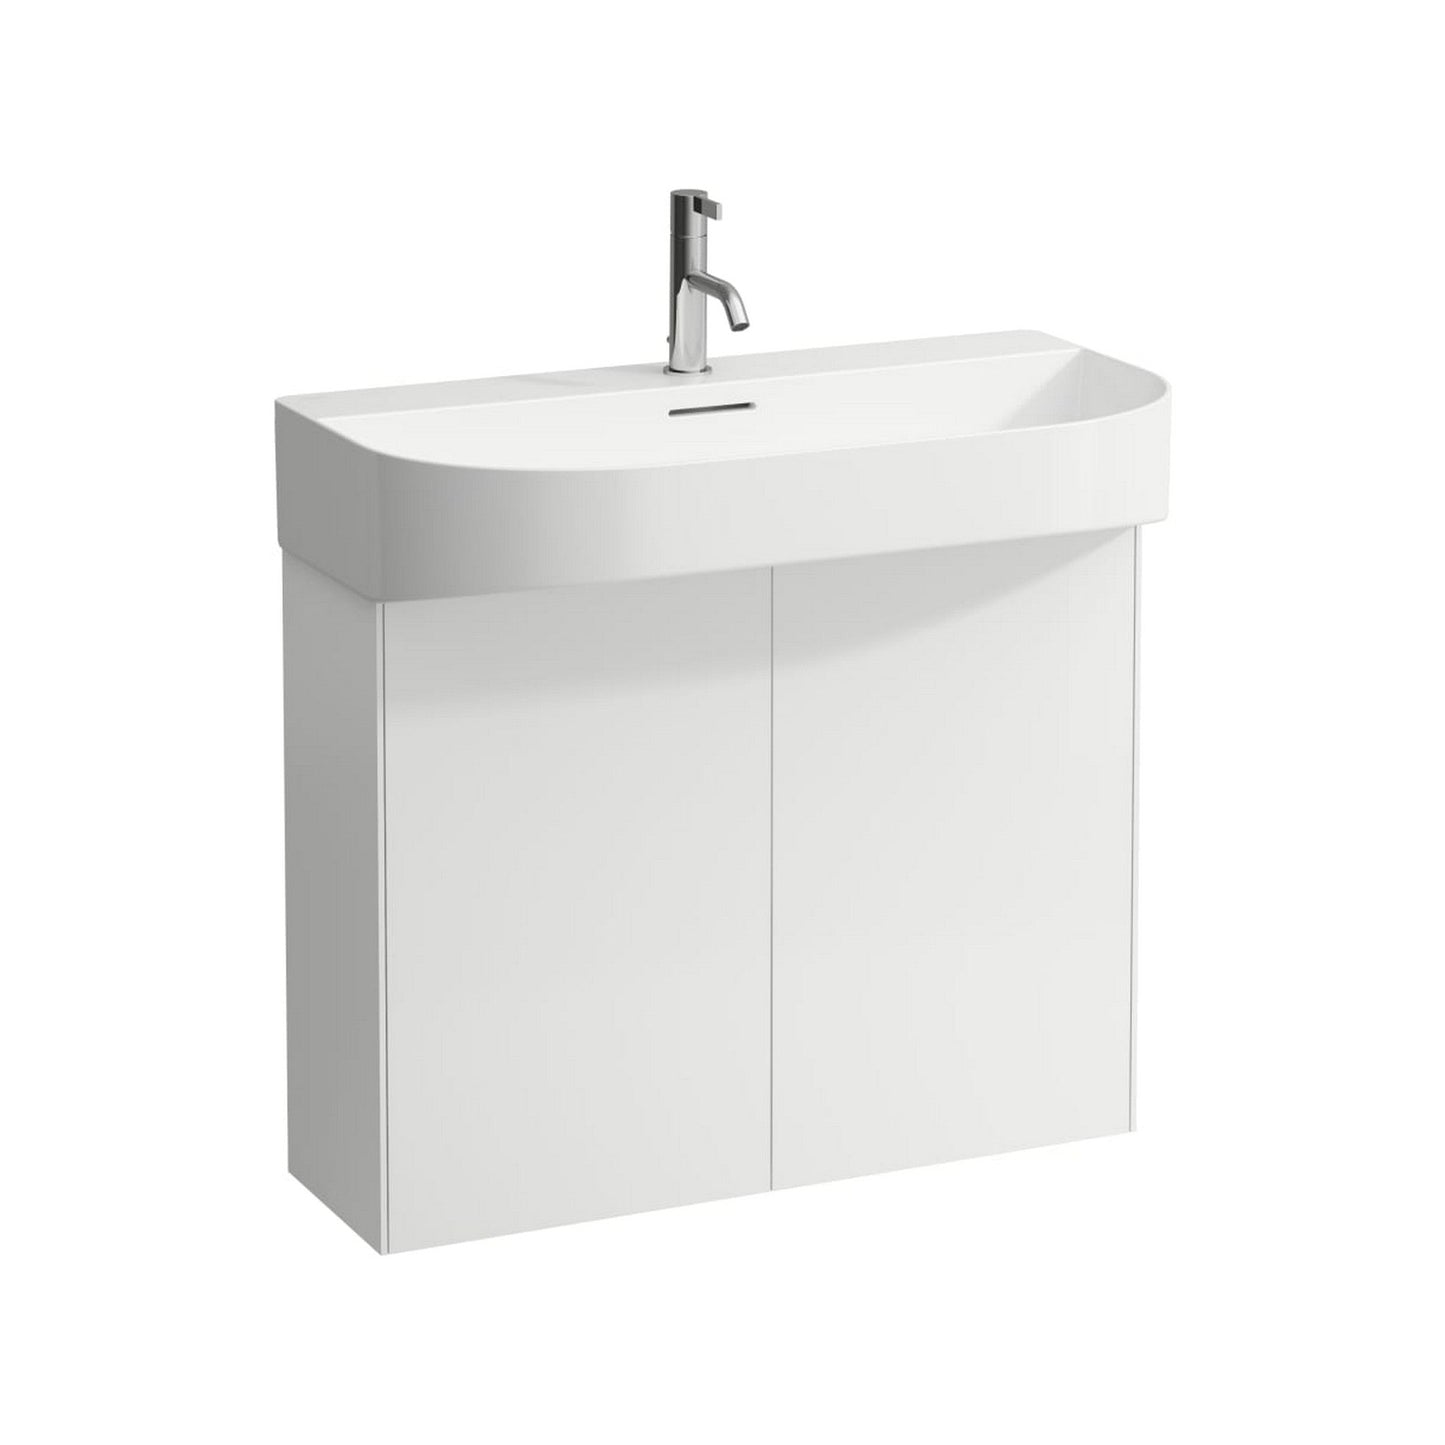 Laufen Sonar 32" White Ceramic Wall-Mounted Bathroom Sink With 3 Faucet Holes